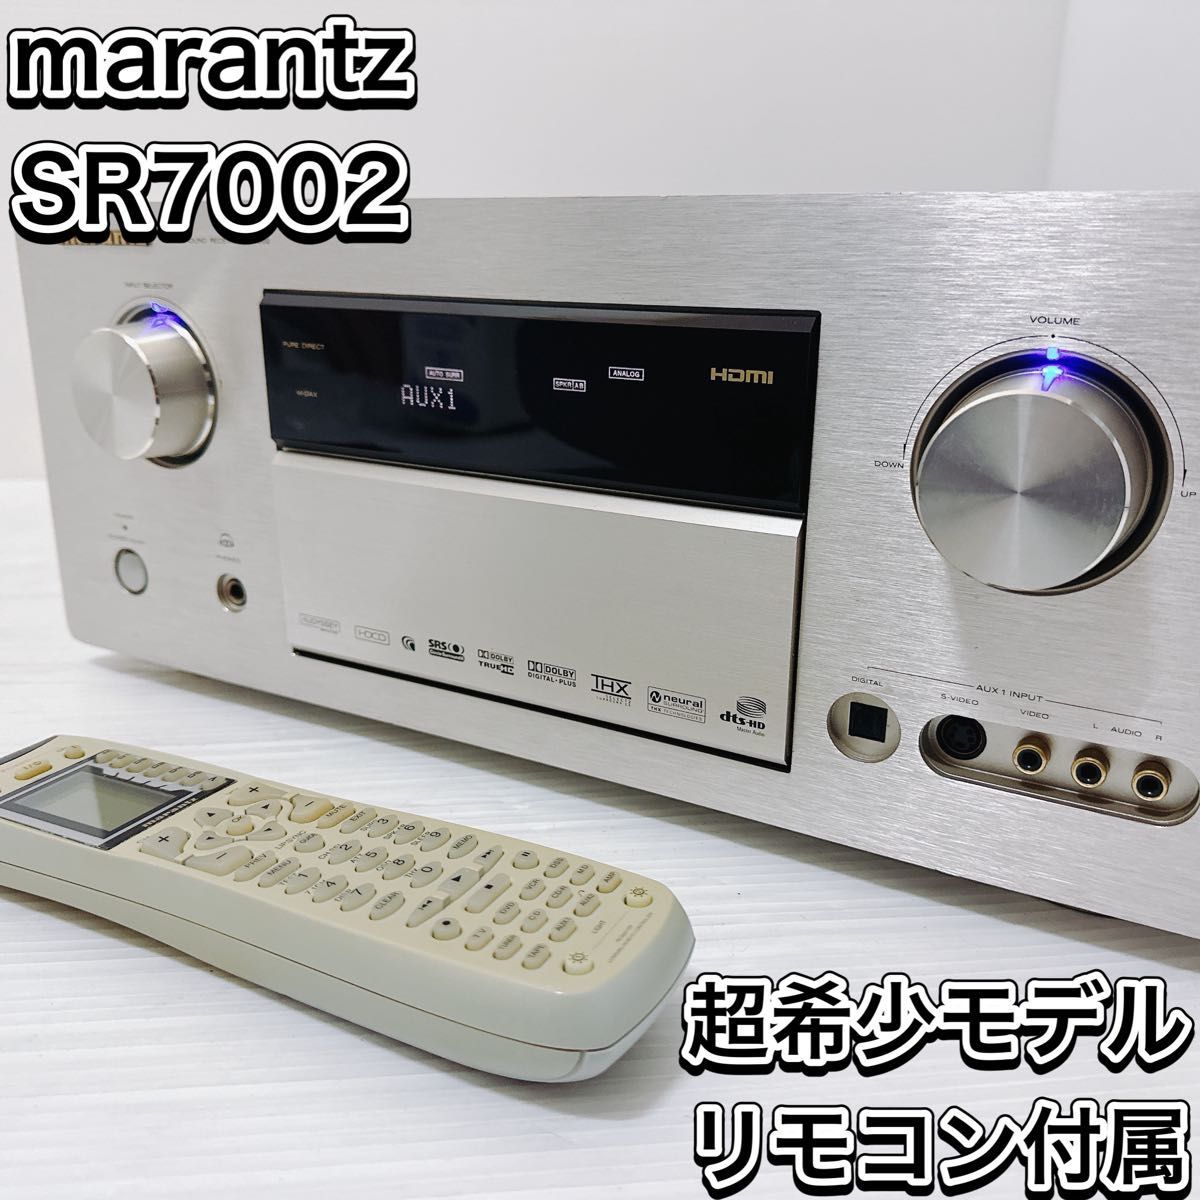  ultra rare Marantz AV amplifier SR7002 gold Gold high class goods build-to-order manufacturing goods remote control Odyssey Mike attached 